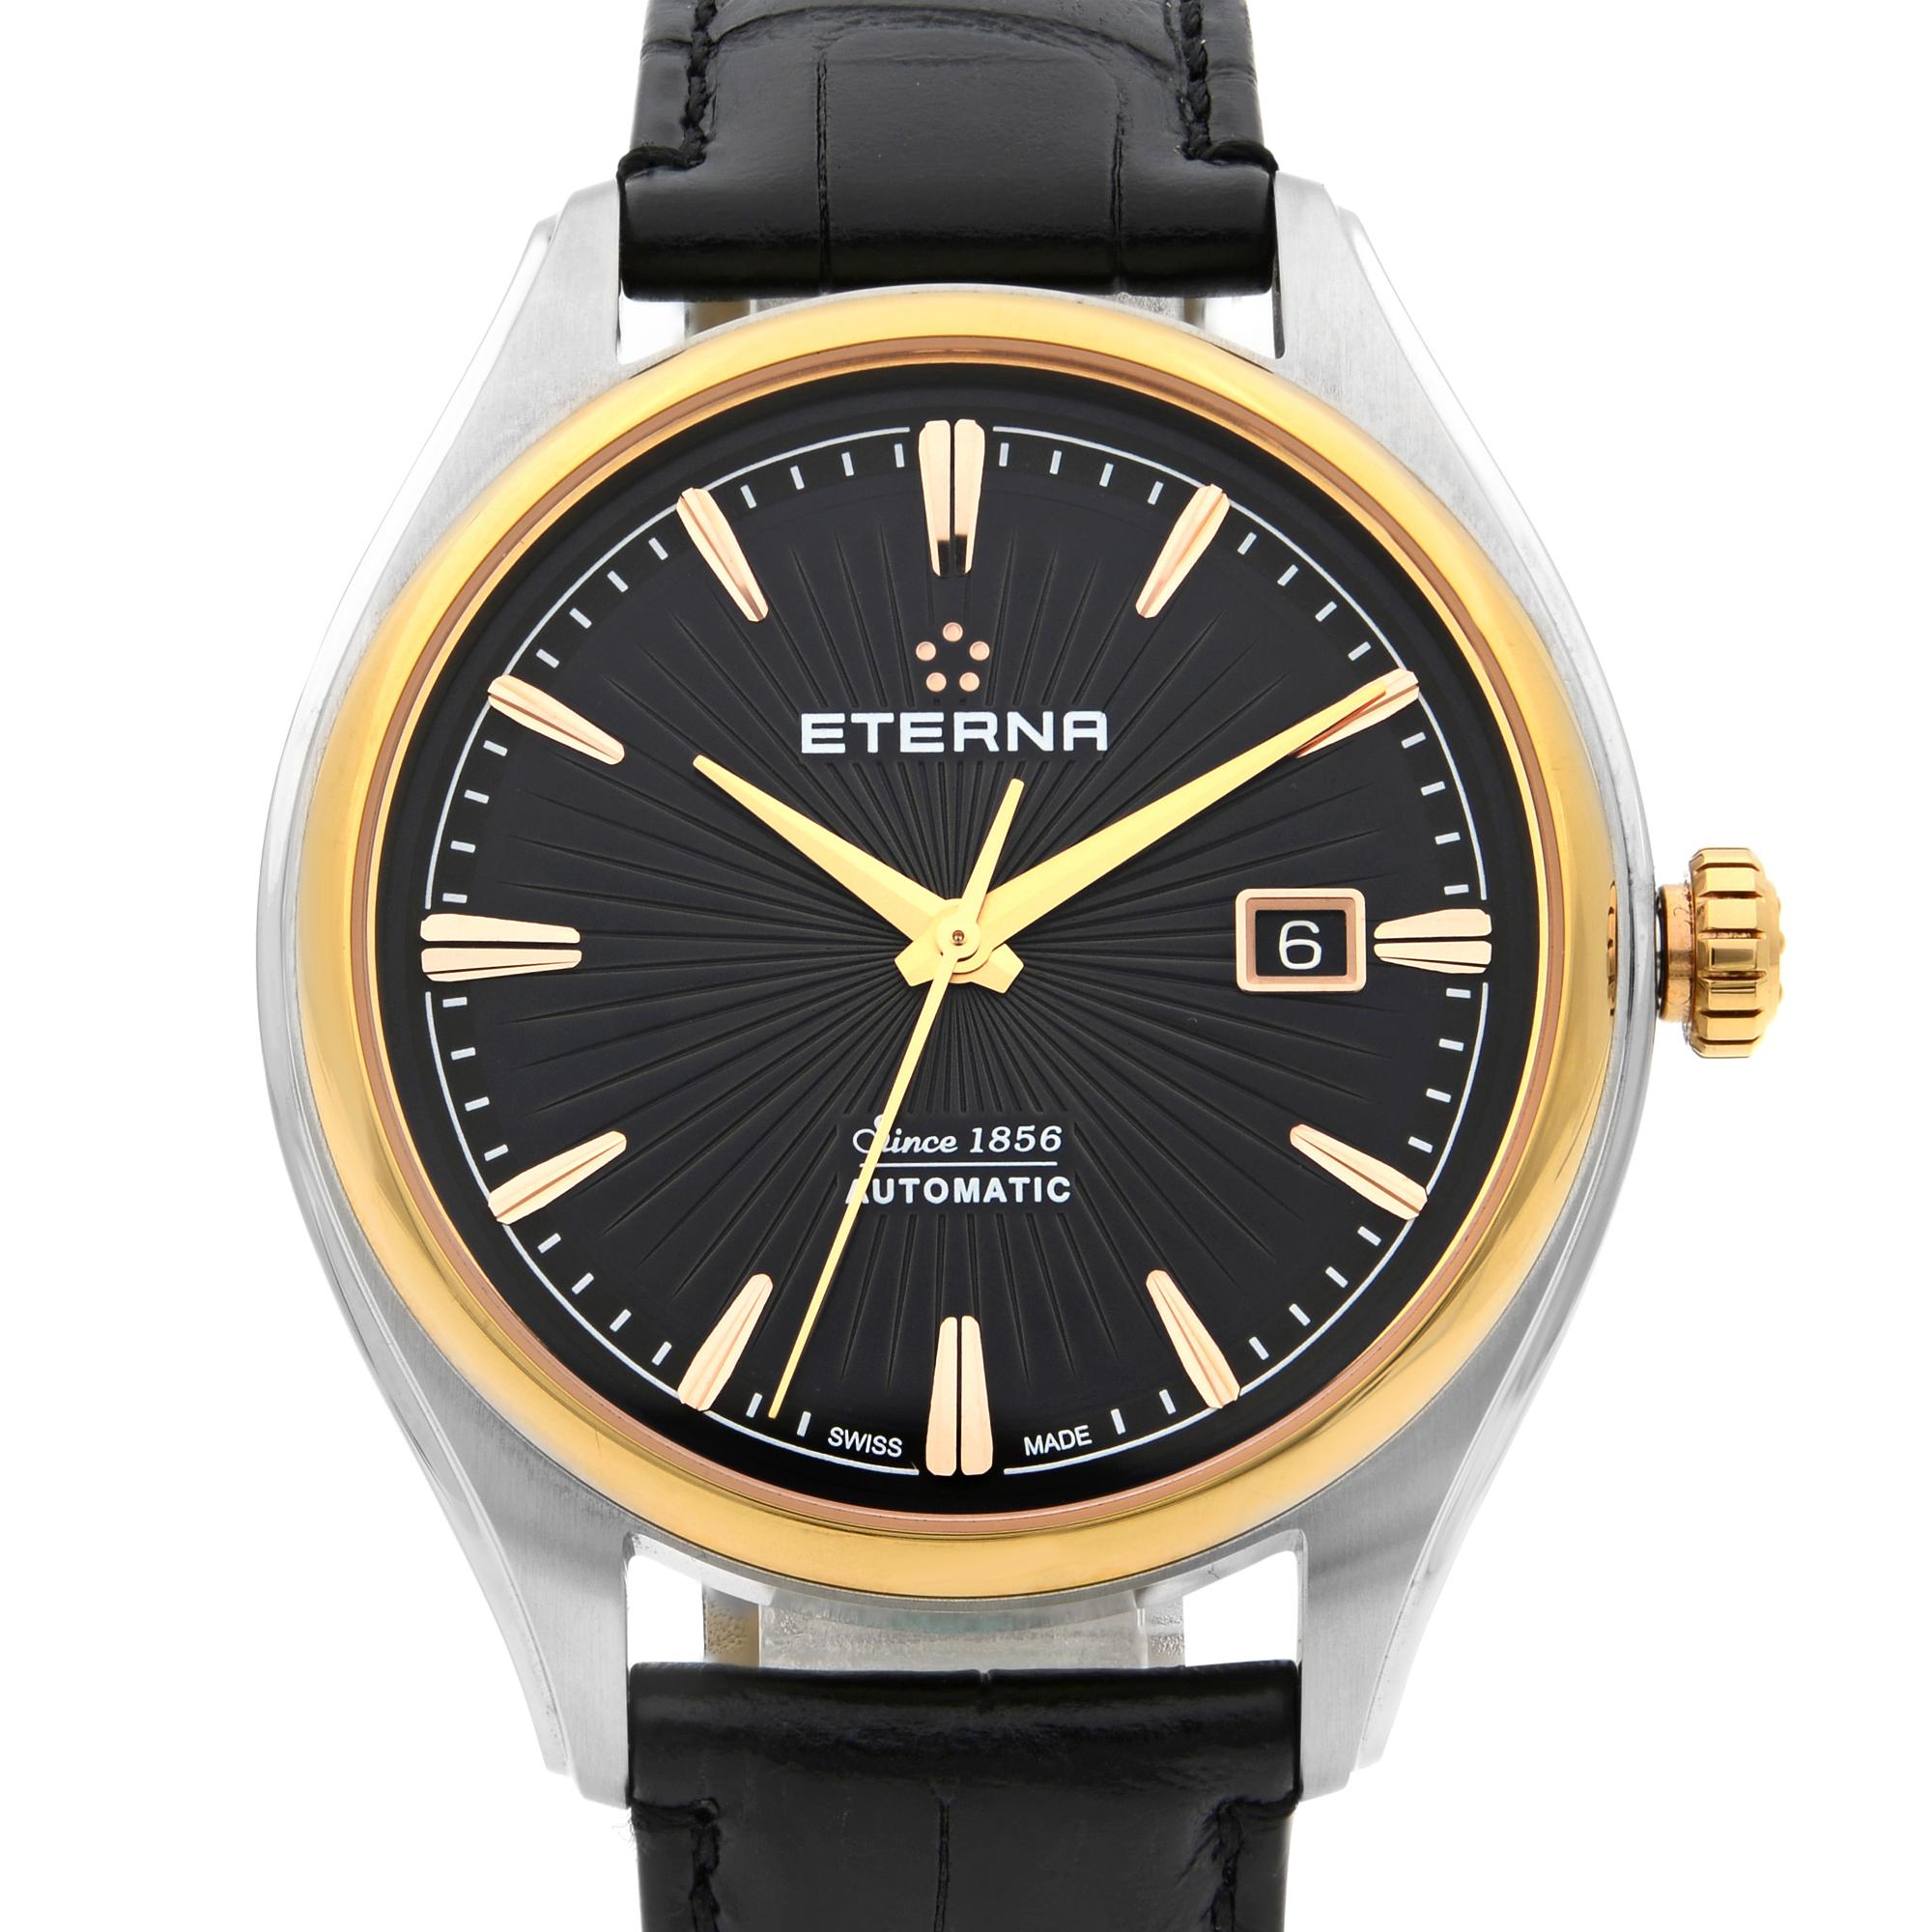 This pre-owned Eterna  2945.51.41.1337 is a beautiful men's timepiece that is powered by a mechanical (automatic) movement which is cased in a stainless steel case. It has a round shape face, date indicator dial, and has hand sticks style markers.